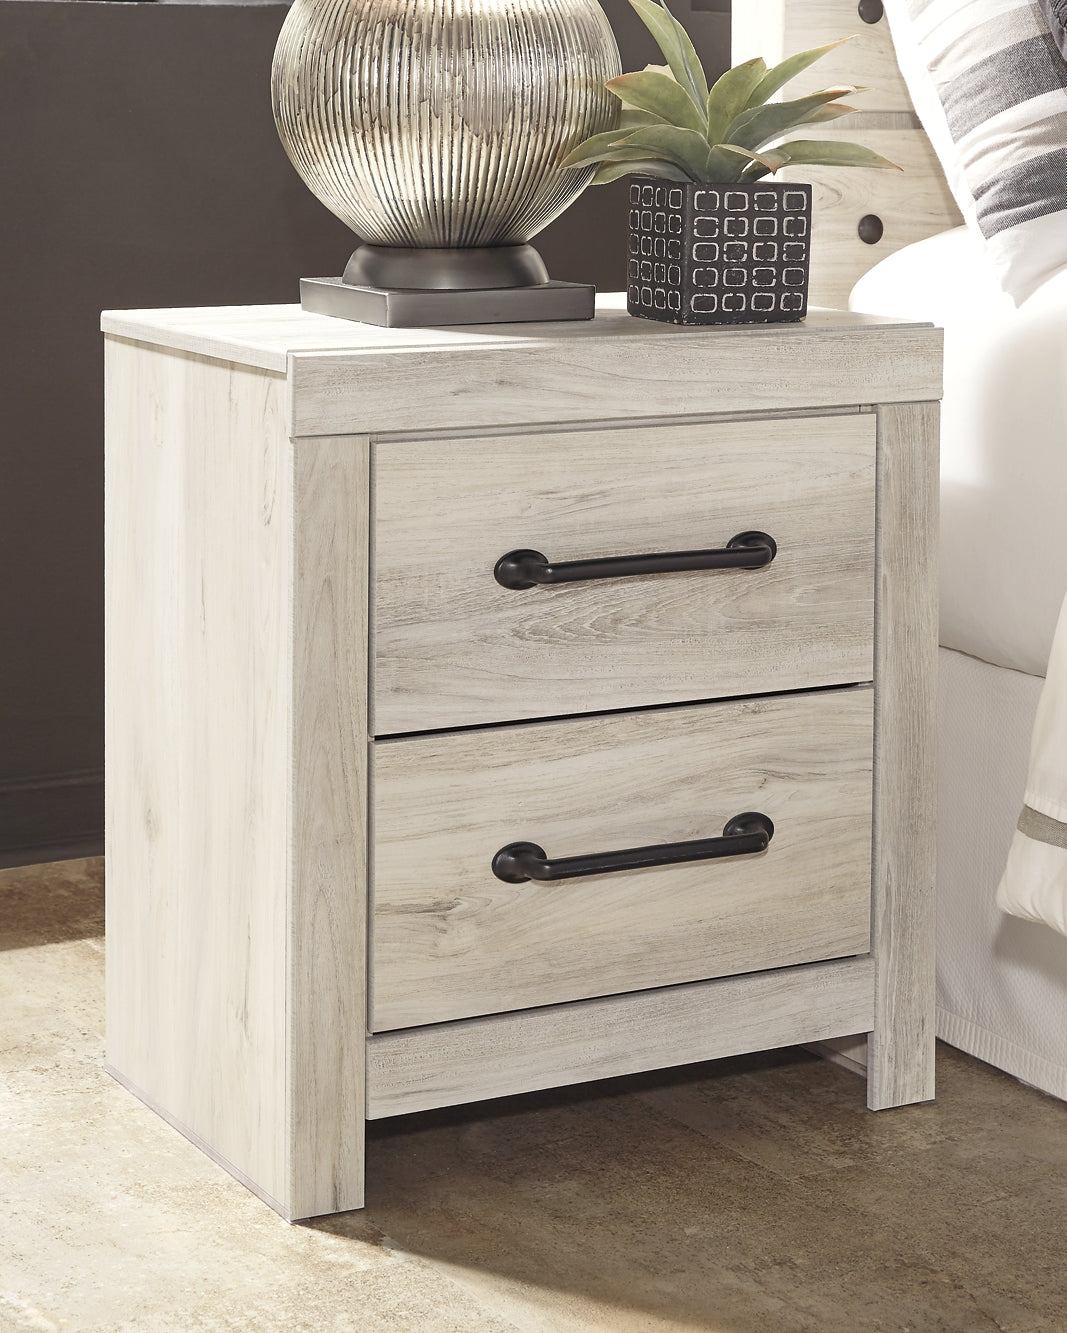 Cambeck Queen Panel Bed with Mirrored Dresser and Nightstand at Walker Mattress and Furniture Locations in Cedar Park and Belton TX.